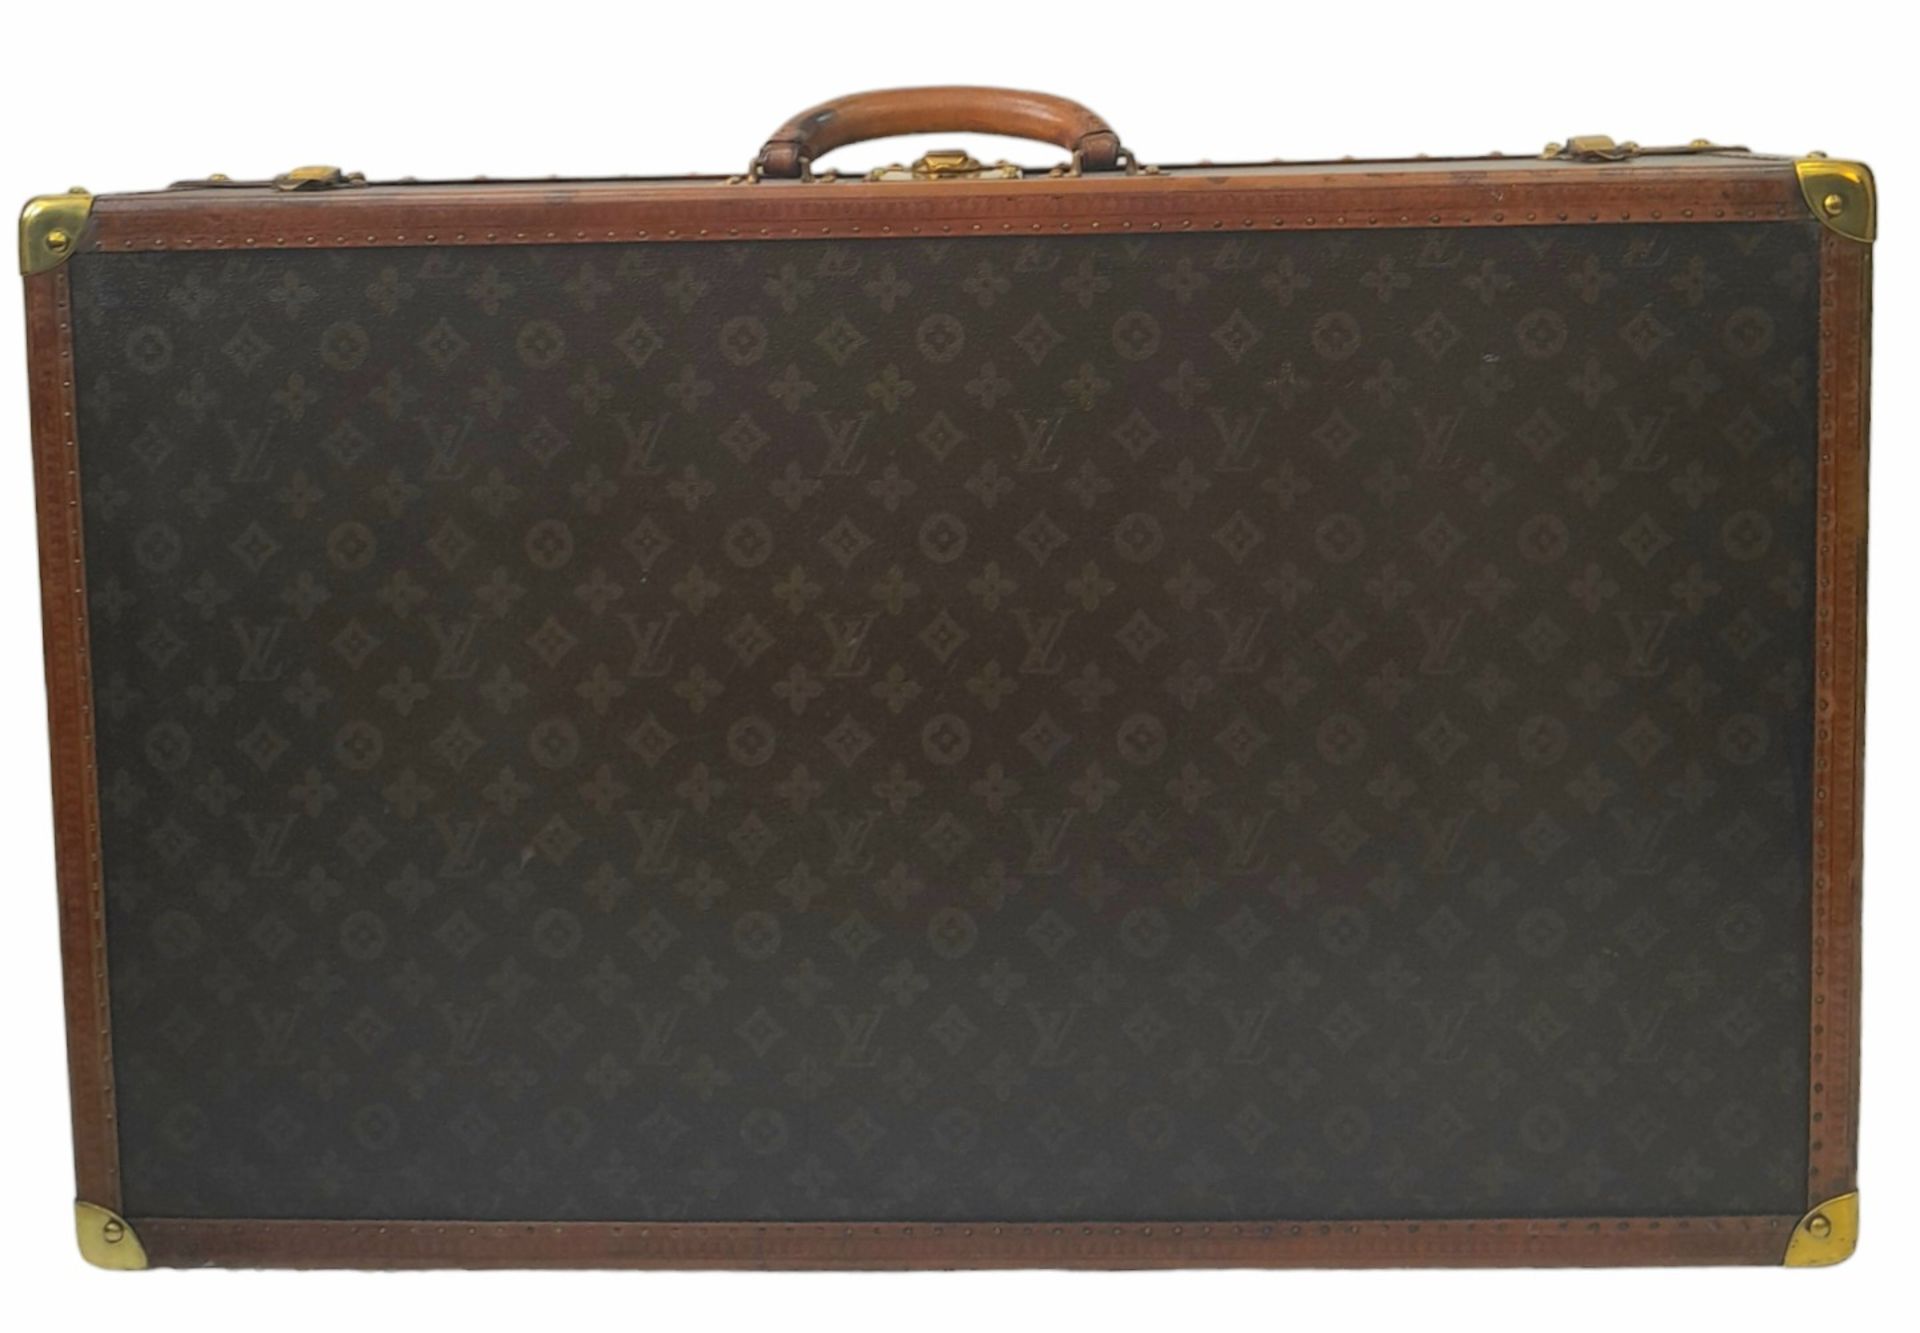 A Vintage Possibly Antique Louis Vuitton Trunk/Hard Suitcase. Canvas monogram LV exterior with - Image 2 of 15